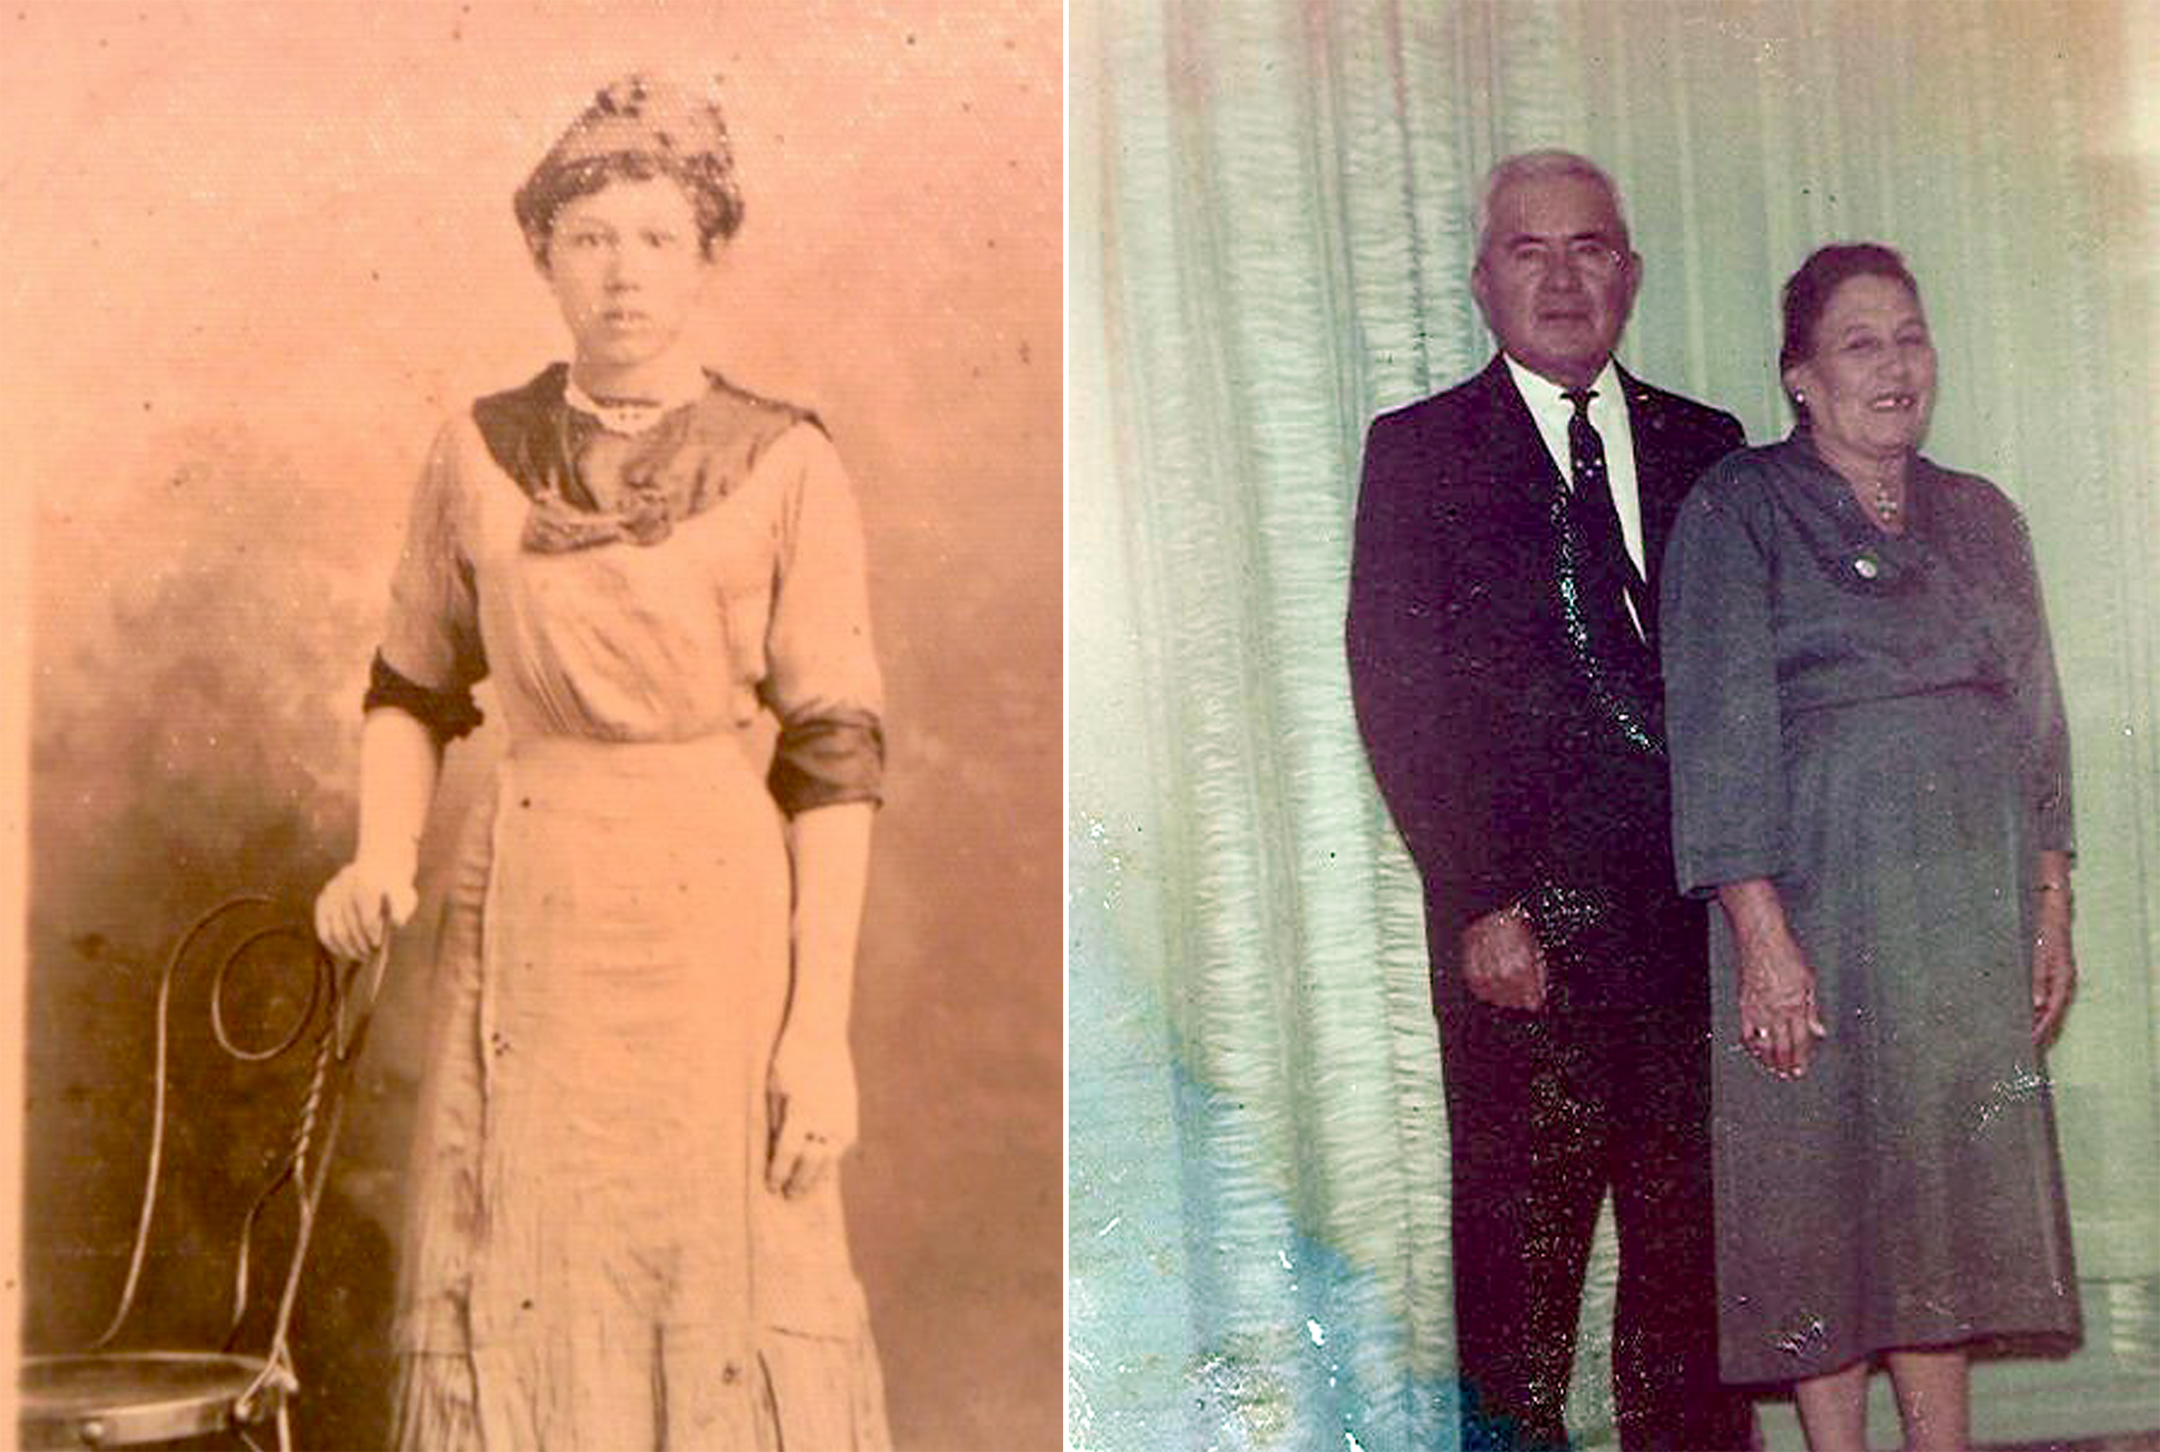 Two photos, side by side, the one on the left a sepia-toned shot a young woman standing while holding a chair, the one on the right of an old couple smiling in dressy clothes